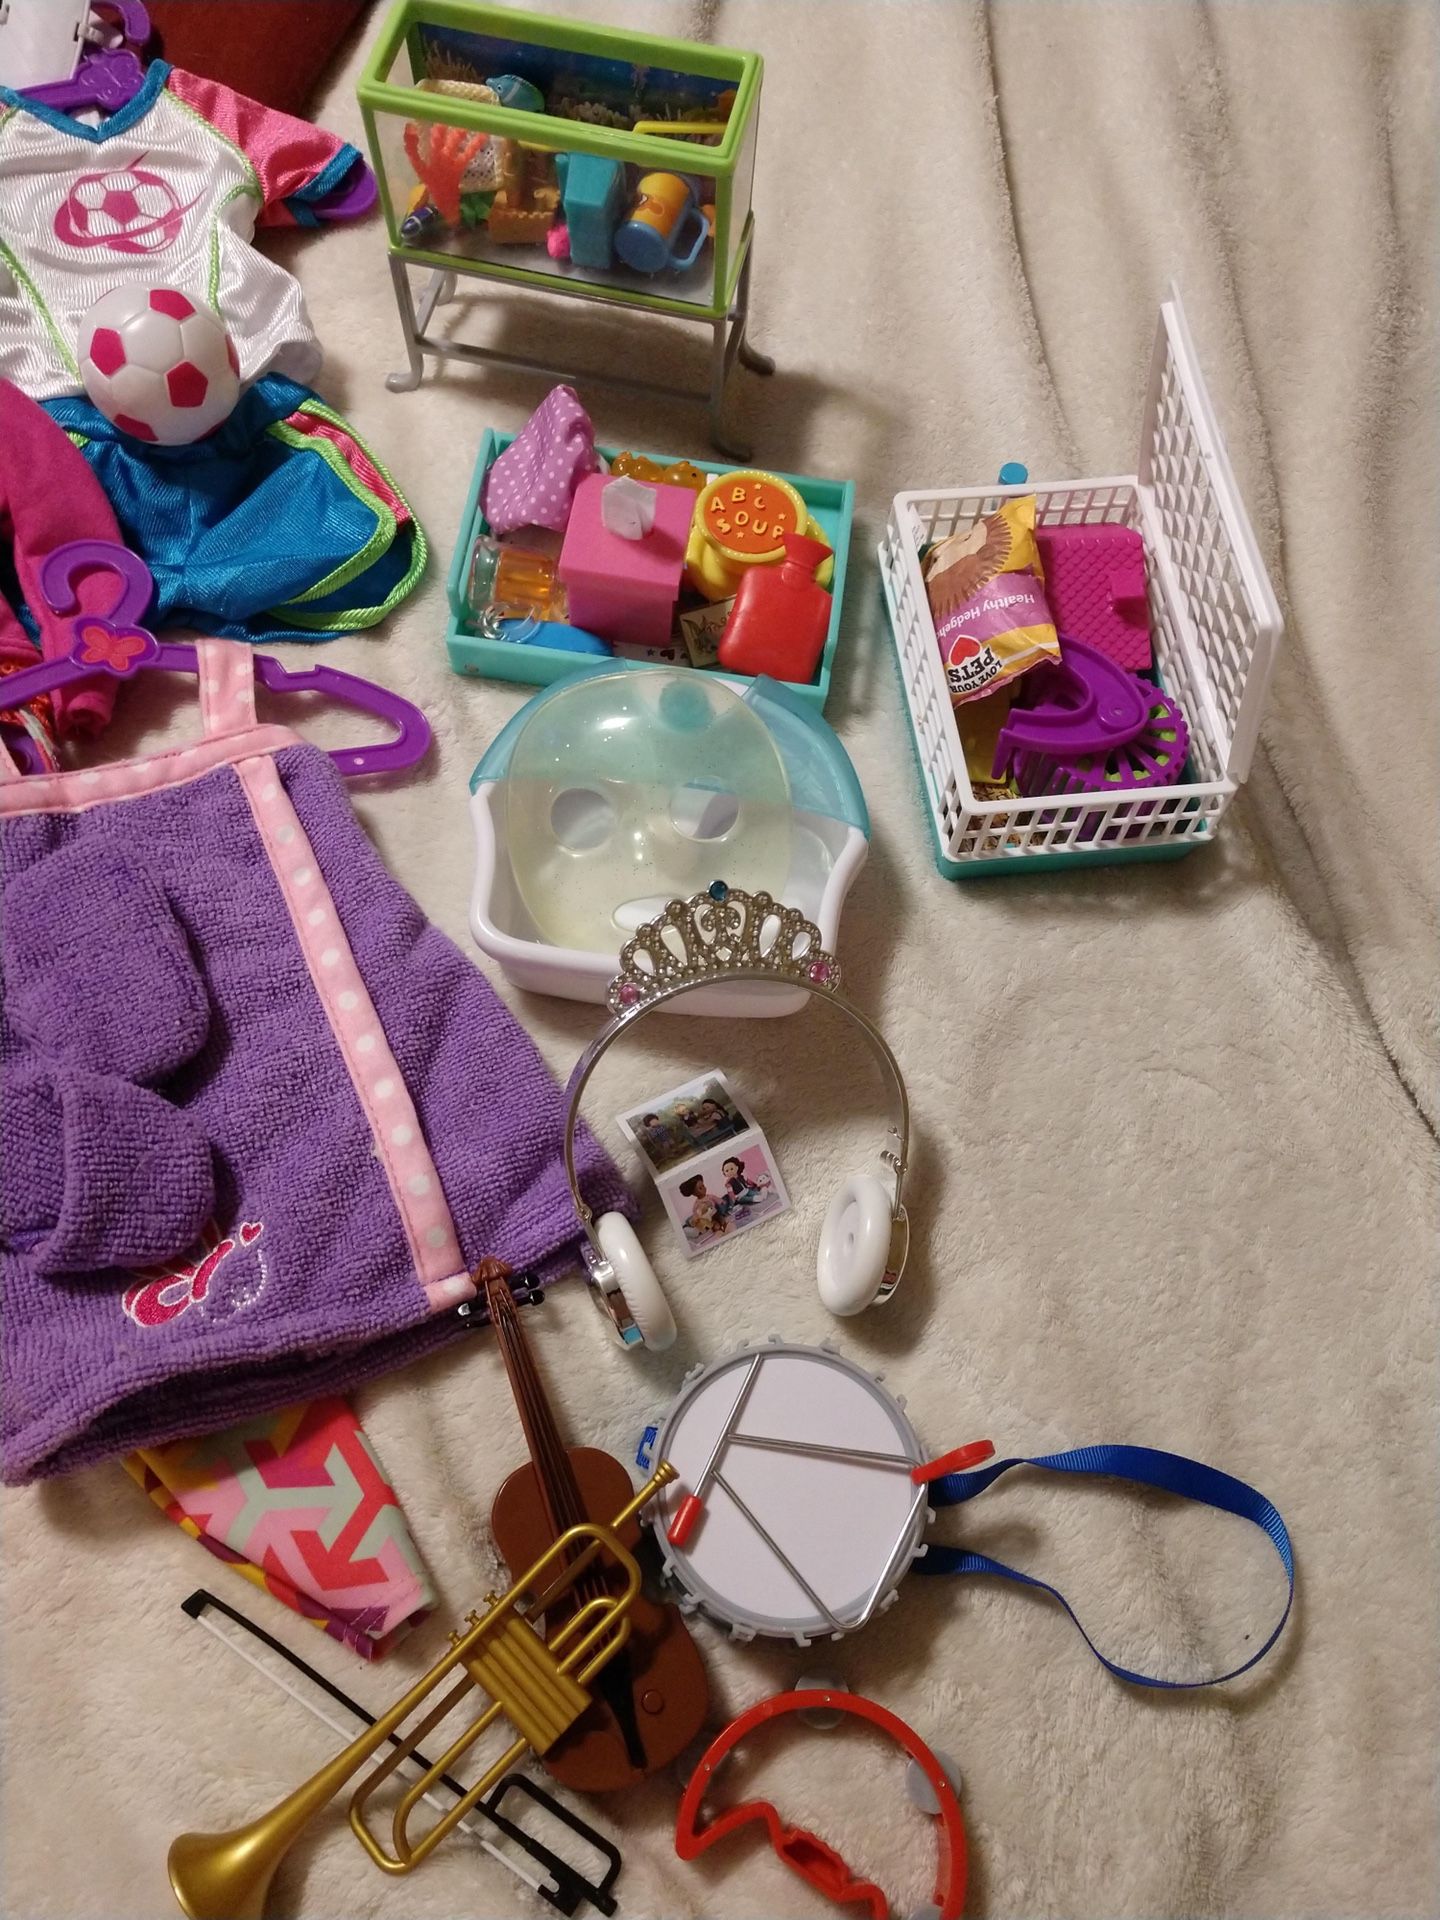 Girl toys: 18” doll accessories/clothes